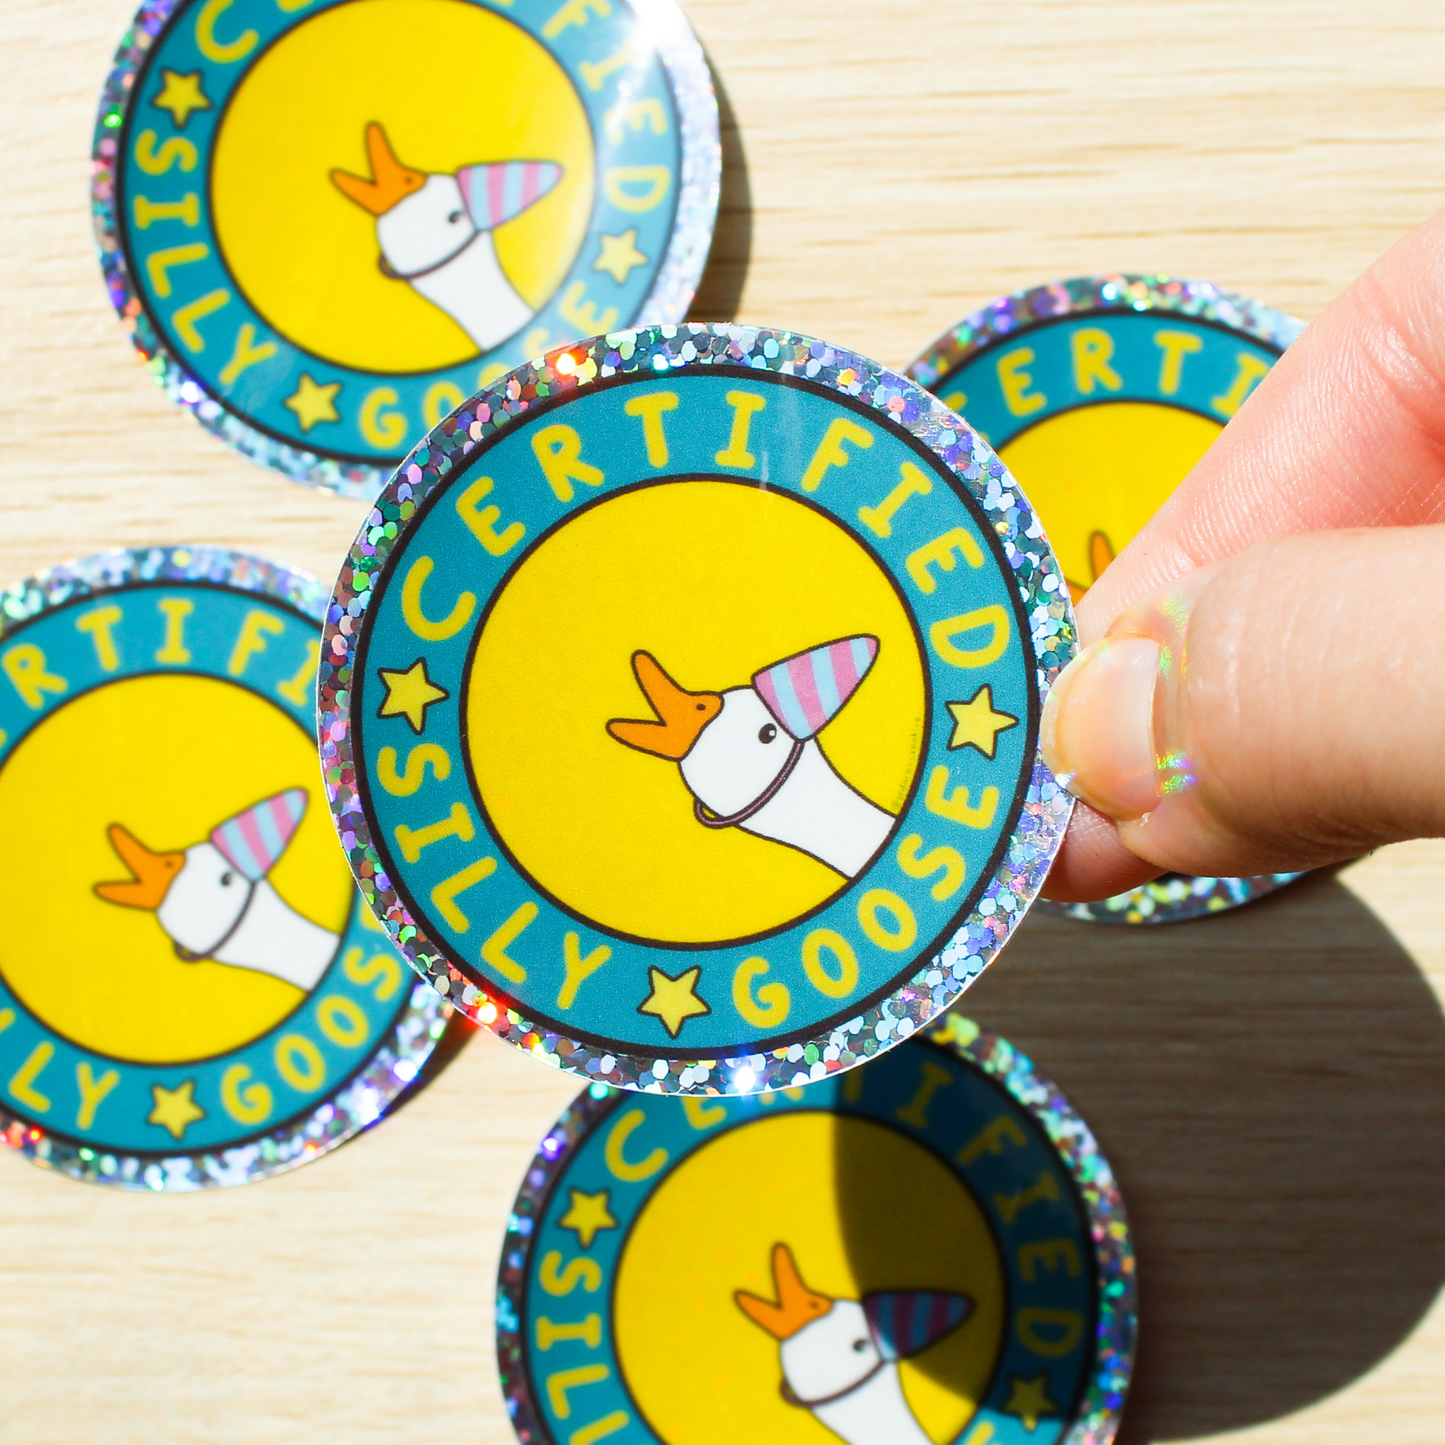 Hand holding a holographic glitter sticker with Certified Silly Goose Sticker written in a circle with stars in between the words. A goose with a blue and pink party hat is popping out on a yellow background. The background has more silly goose stickers on a light wood background